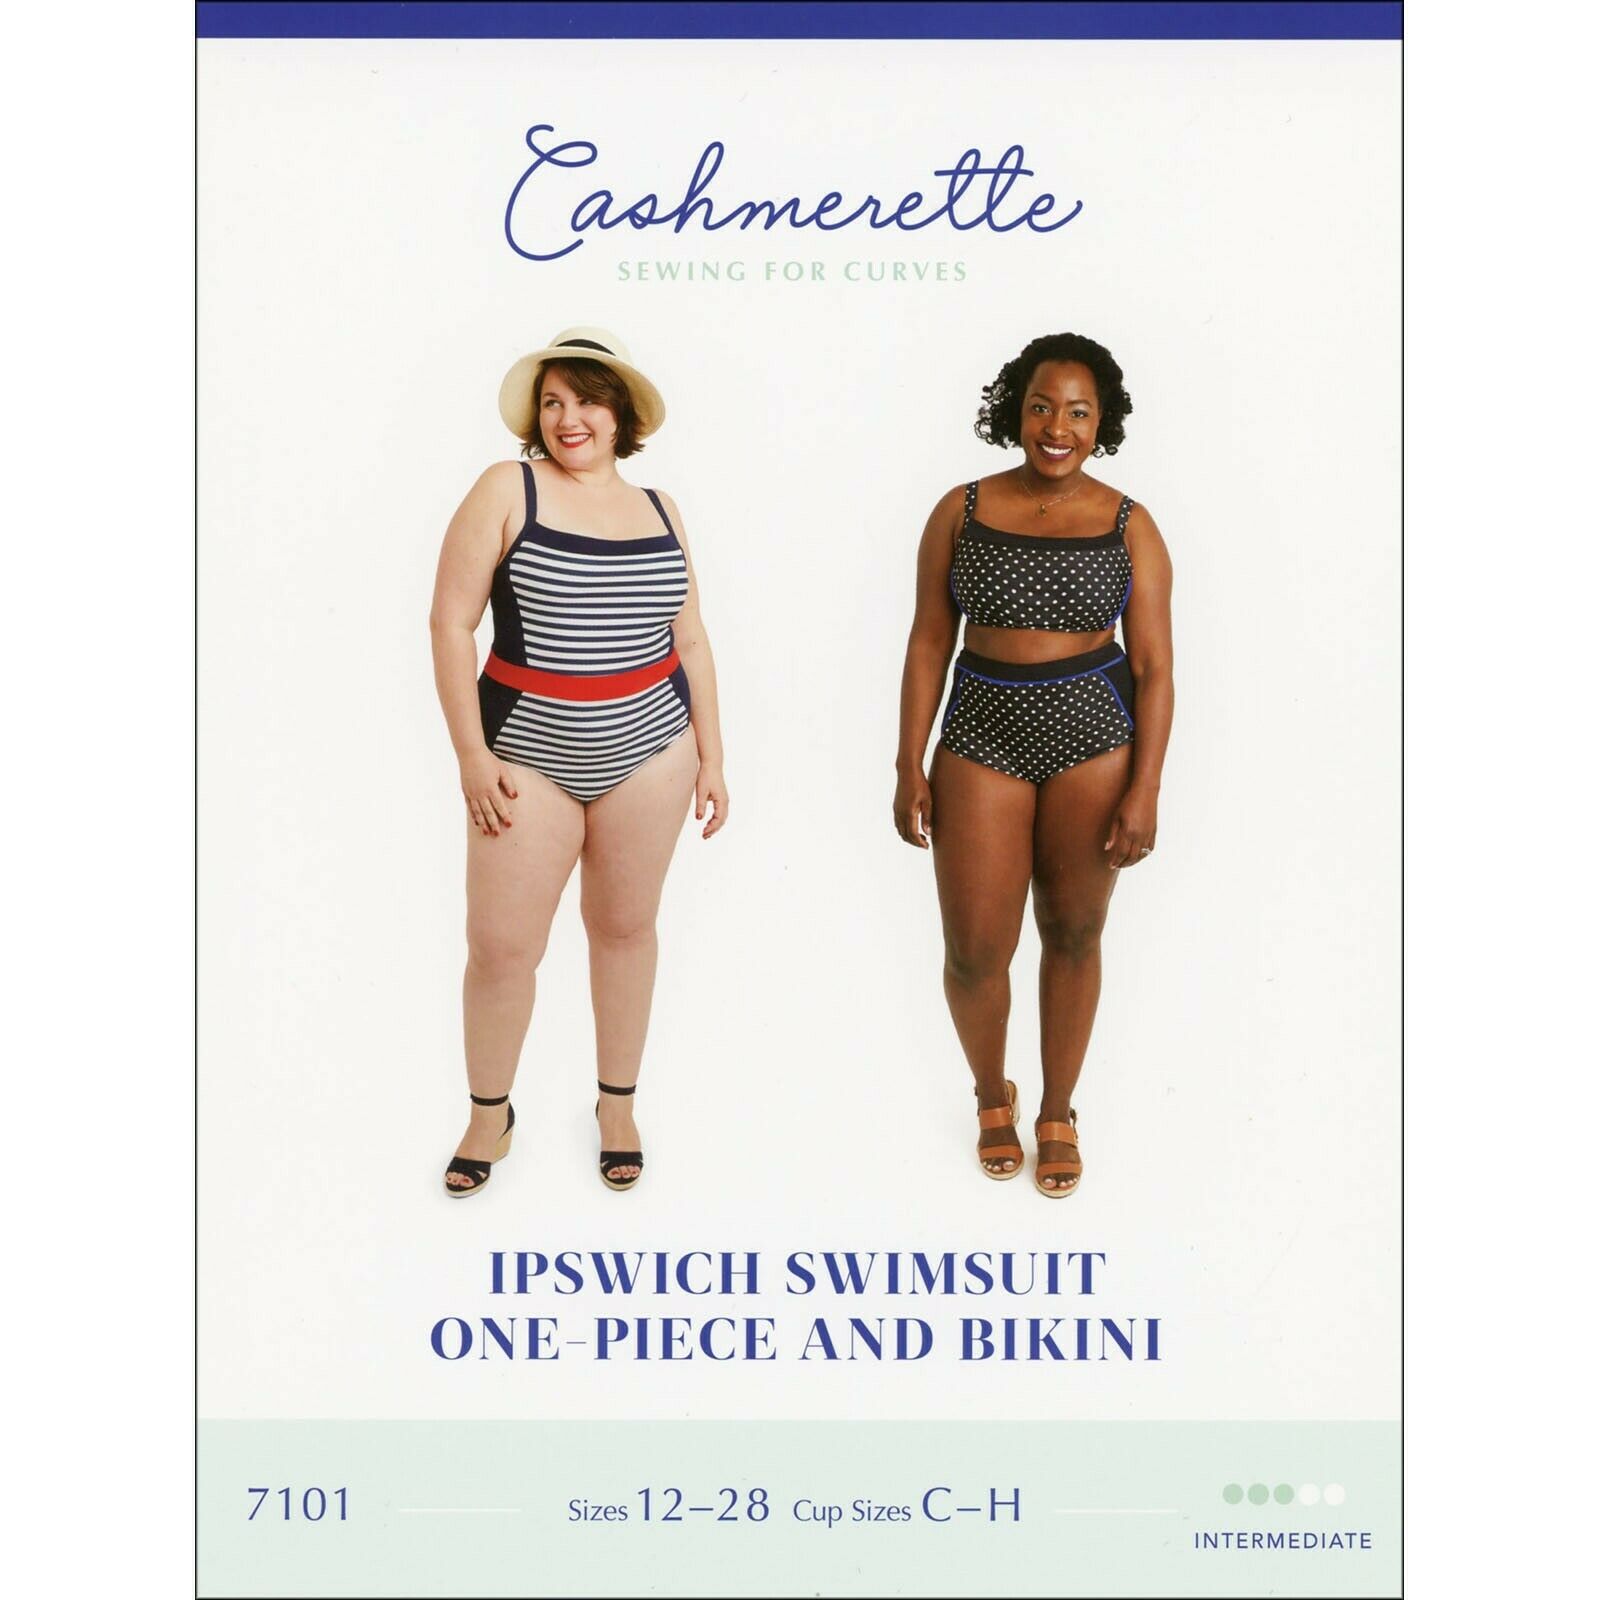 It's here! The Ipswich Swimsuit sewing pattern with underwired bra